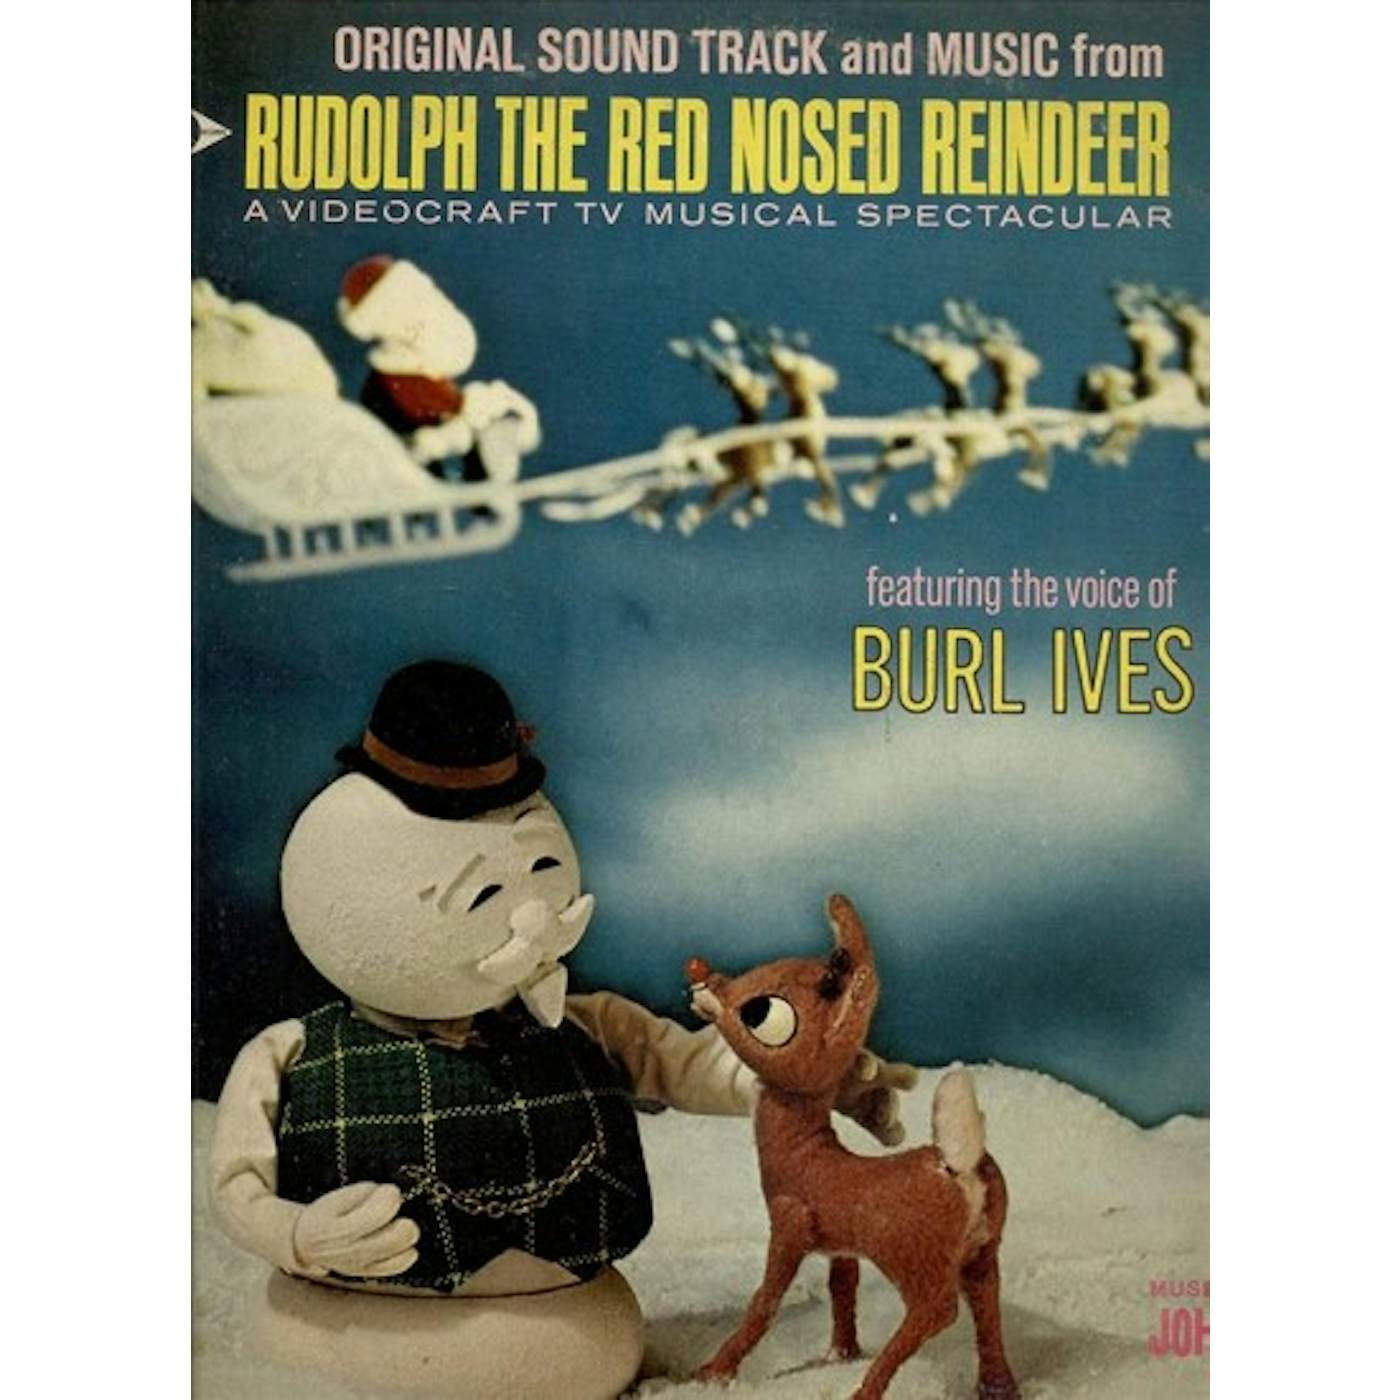 Burl Ives Rudolph The Red-Nosed Reindeer Vinyl Record